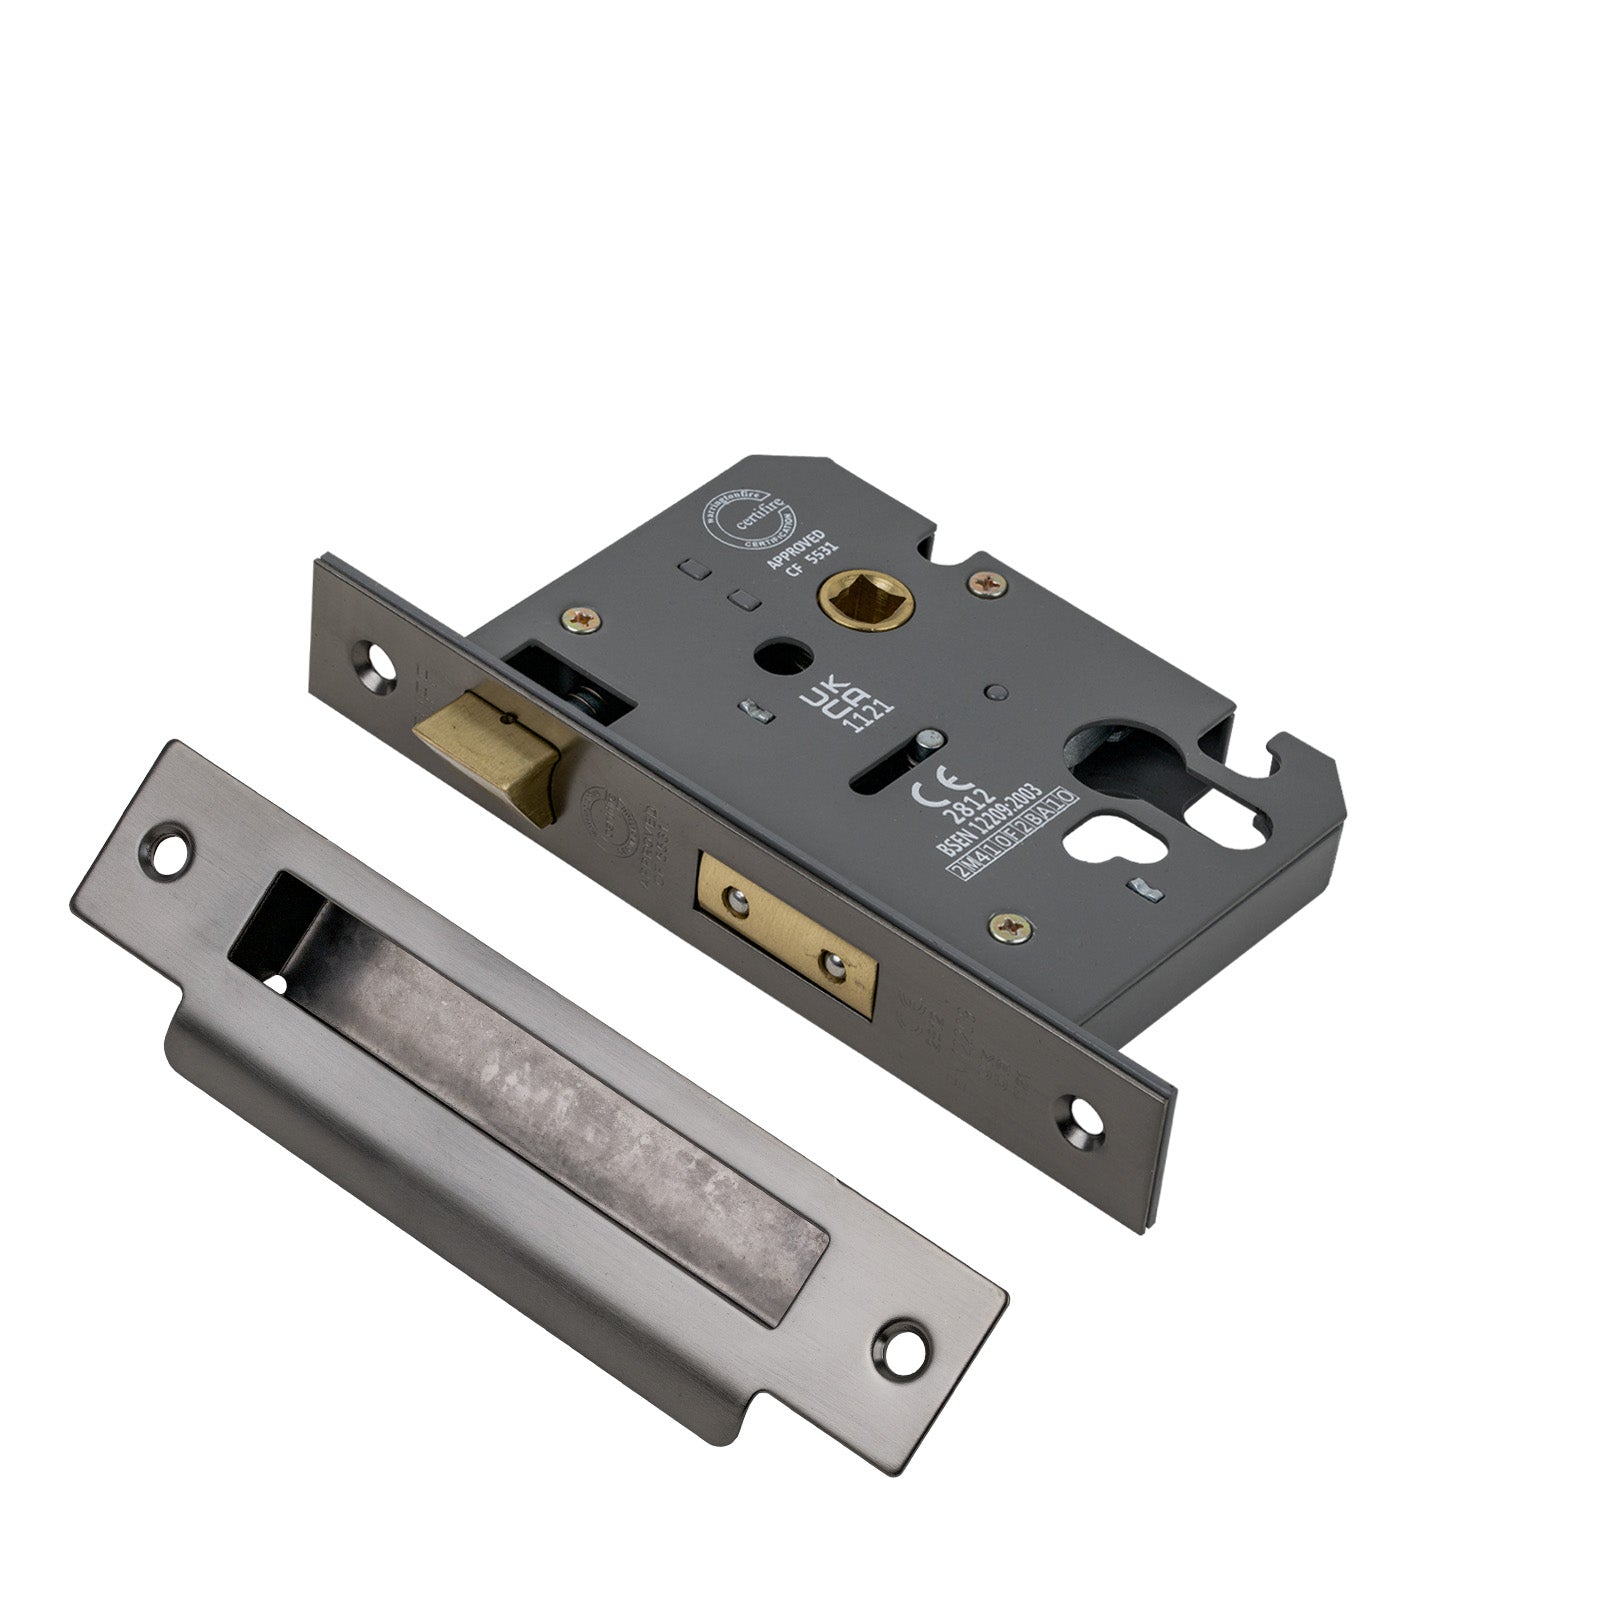 SHOW 3 Lever Euro Sash Lock - 3 Inch with Matt Gun Metal finished forend and striker plate